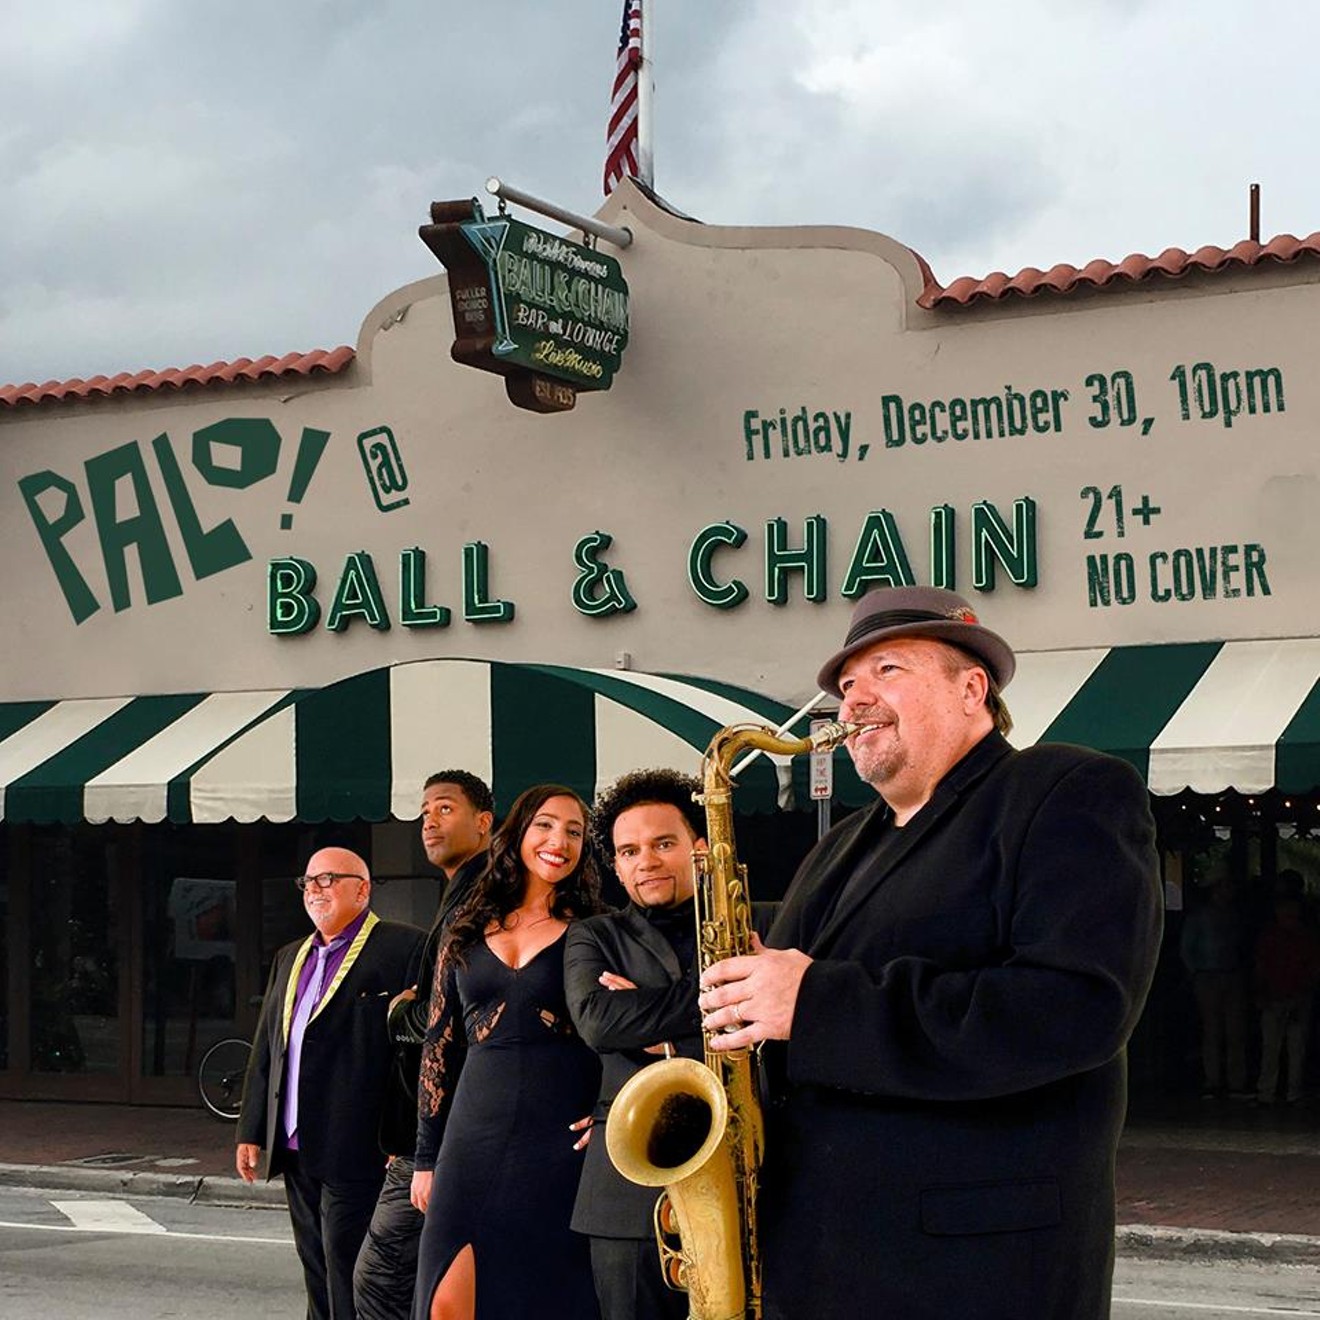 Palo! and Ed Calle (far right) in happier days pose in front of Ball & Chain, where they will play Friday night.